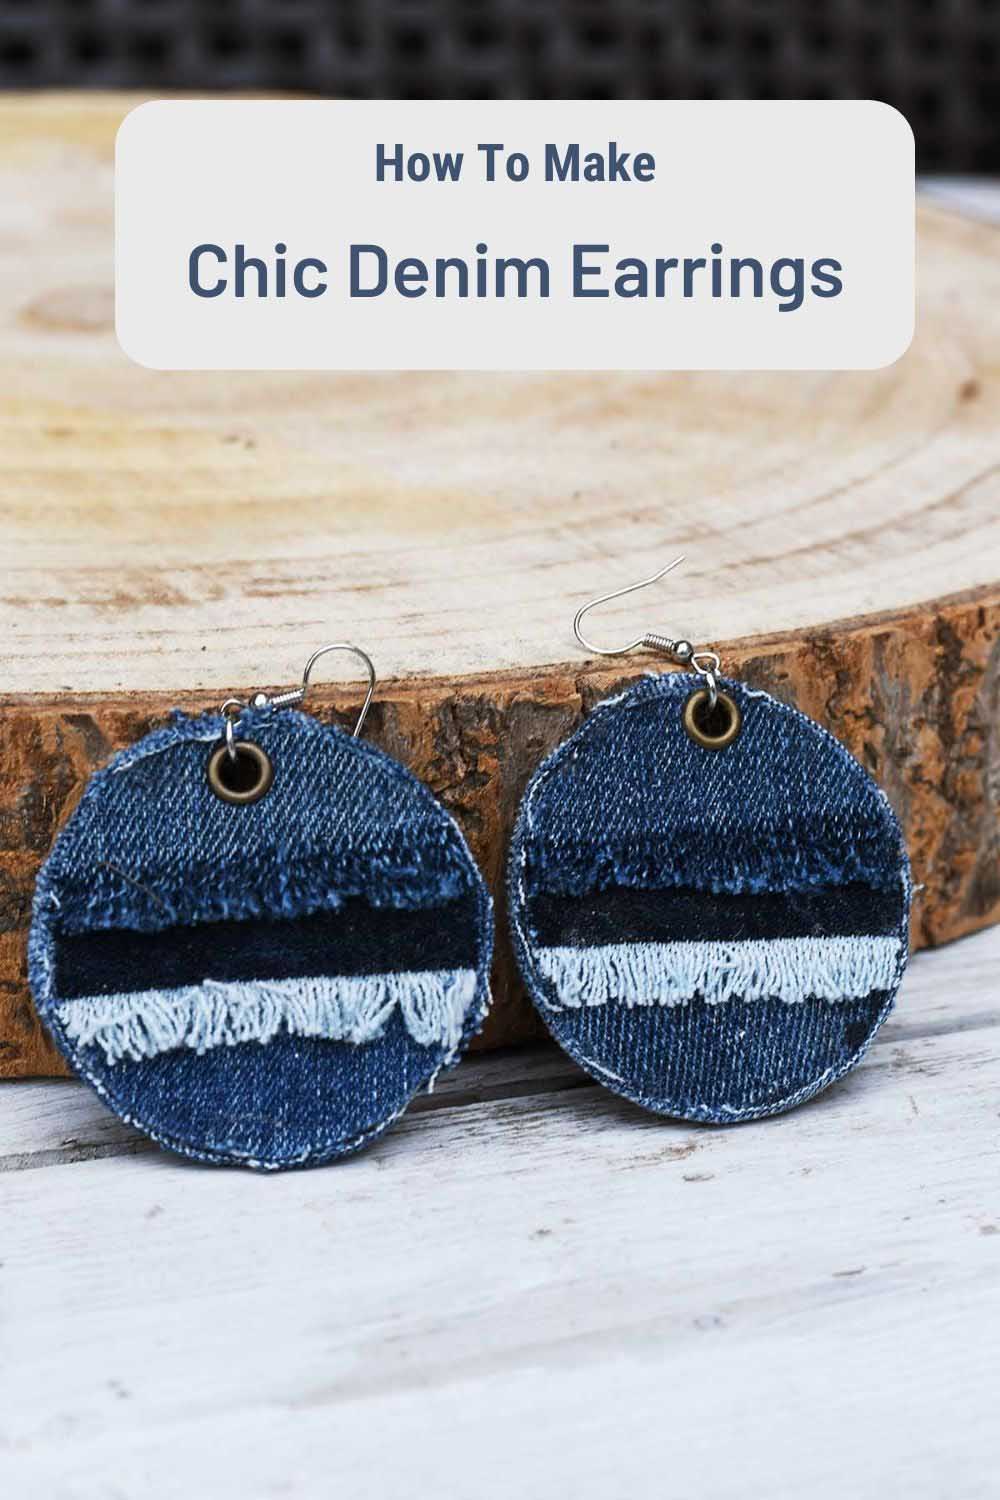 Upcycled jeans earrings and jewelery